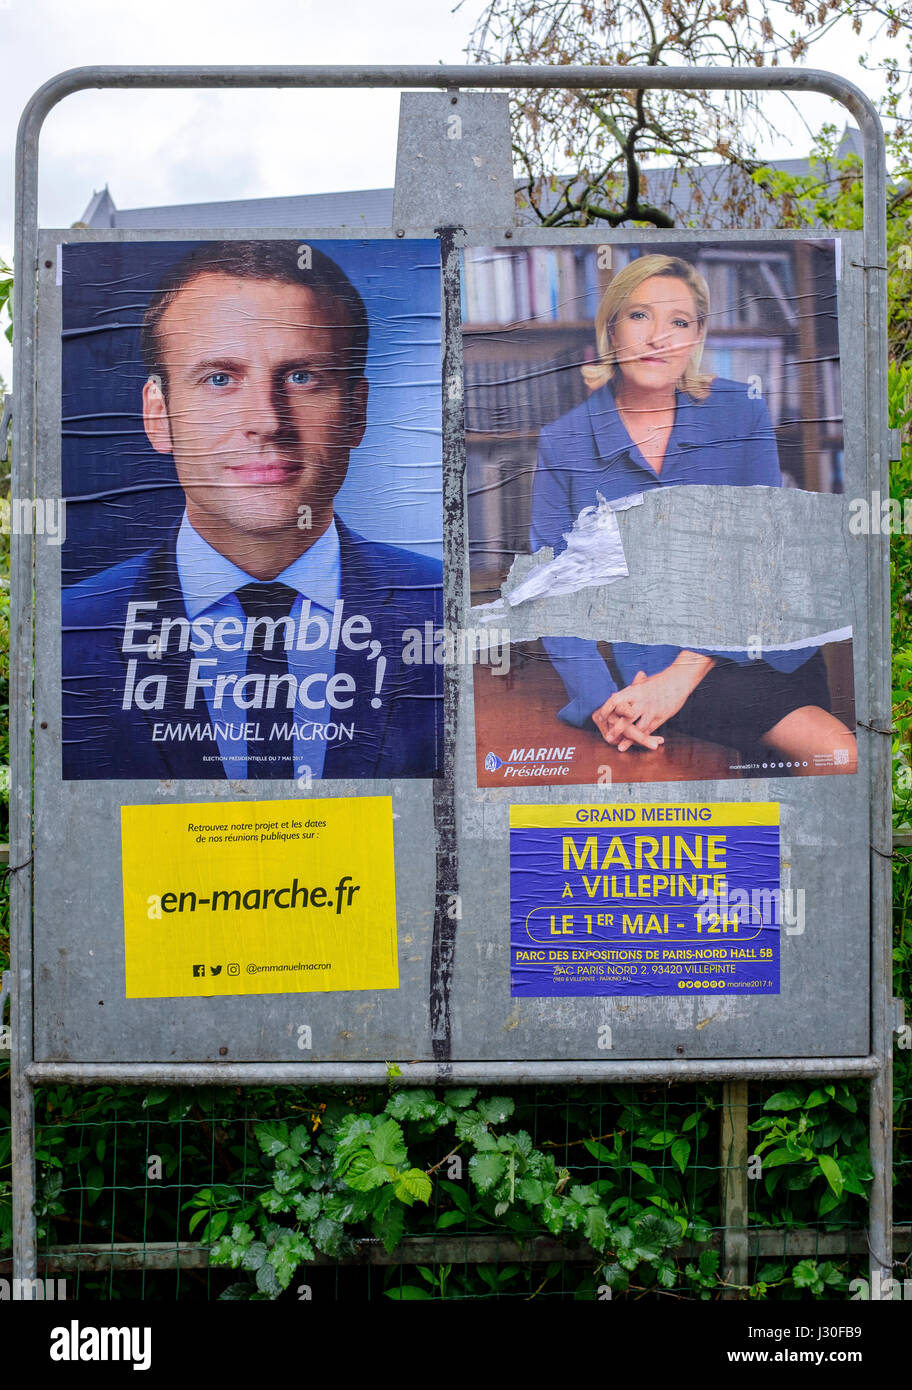 Strasbourg, Emmanuel Macron, Marine Le Pen posters, 2 finalist candidates running for the French president election May 2017, Alsace, France, Europe, Stock Photo